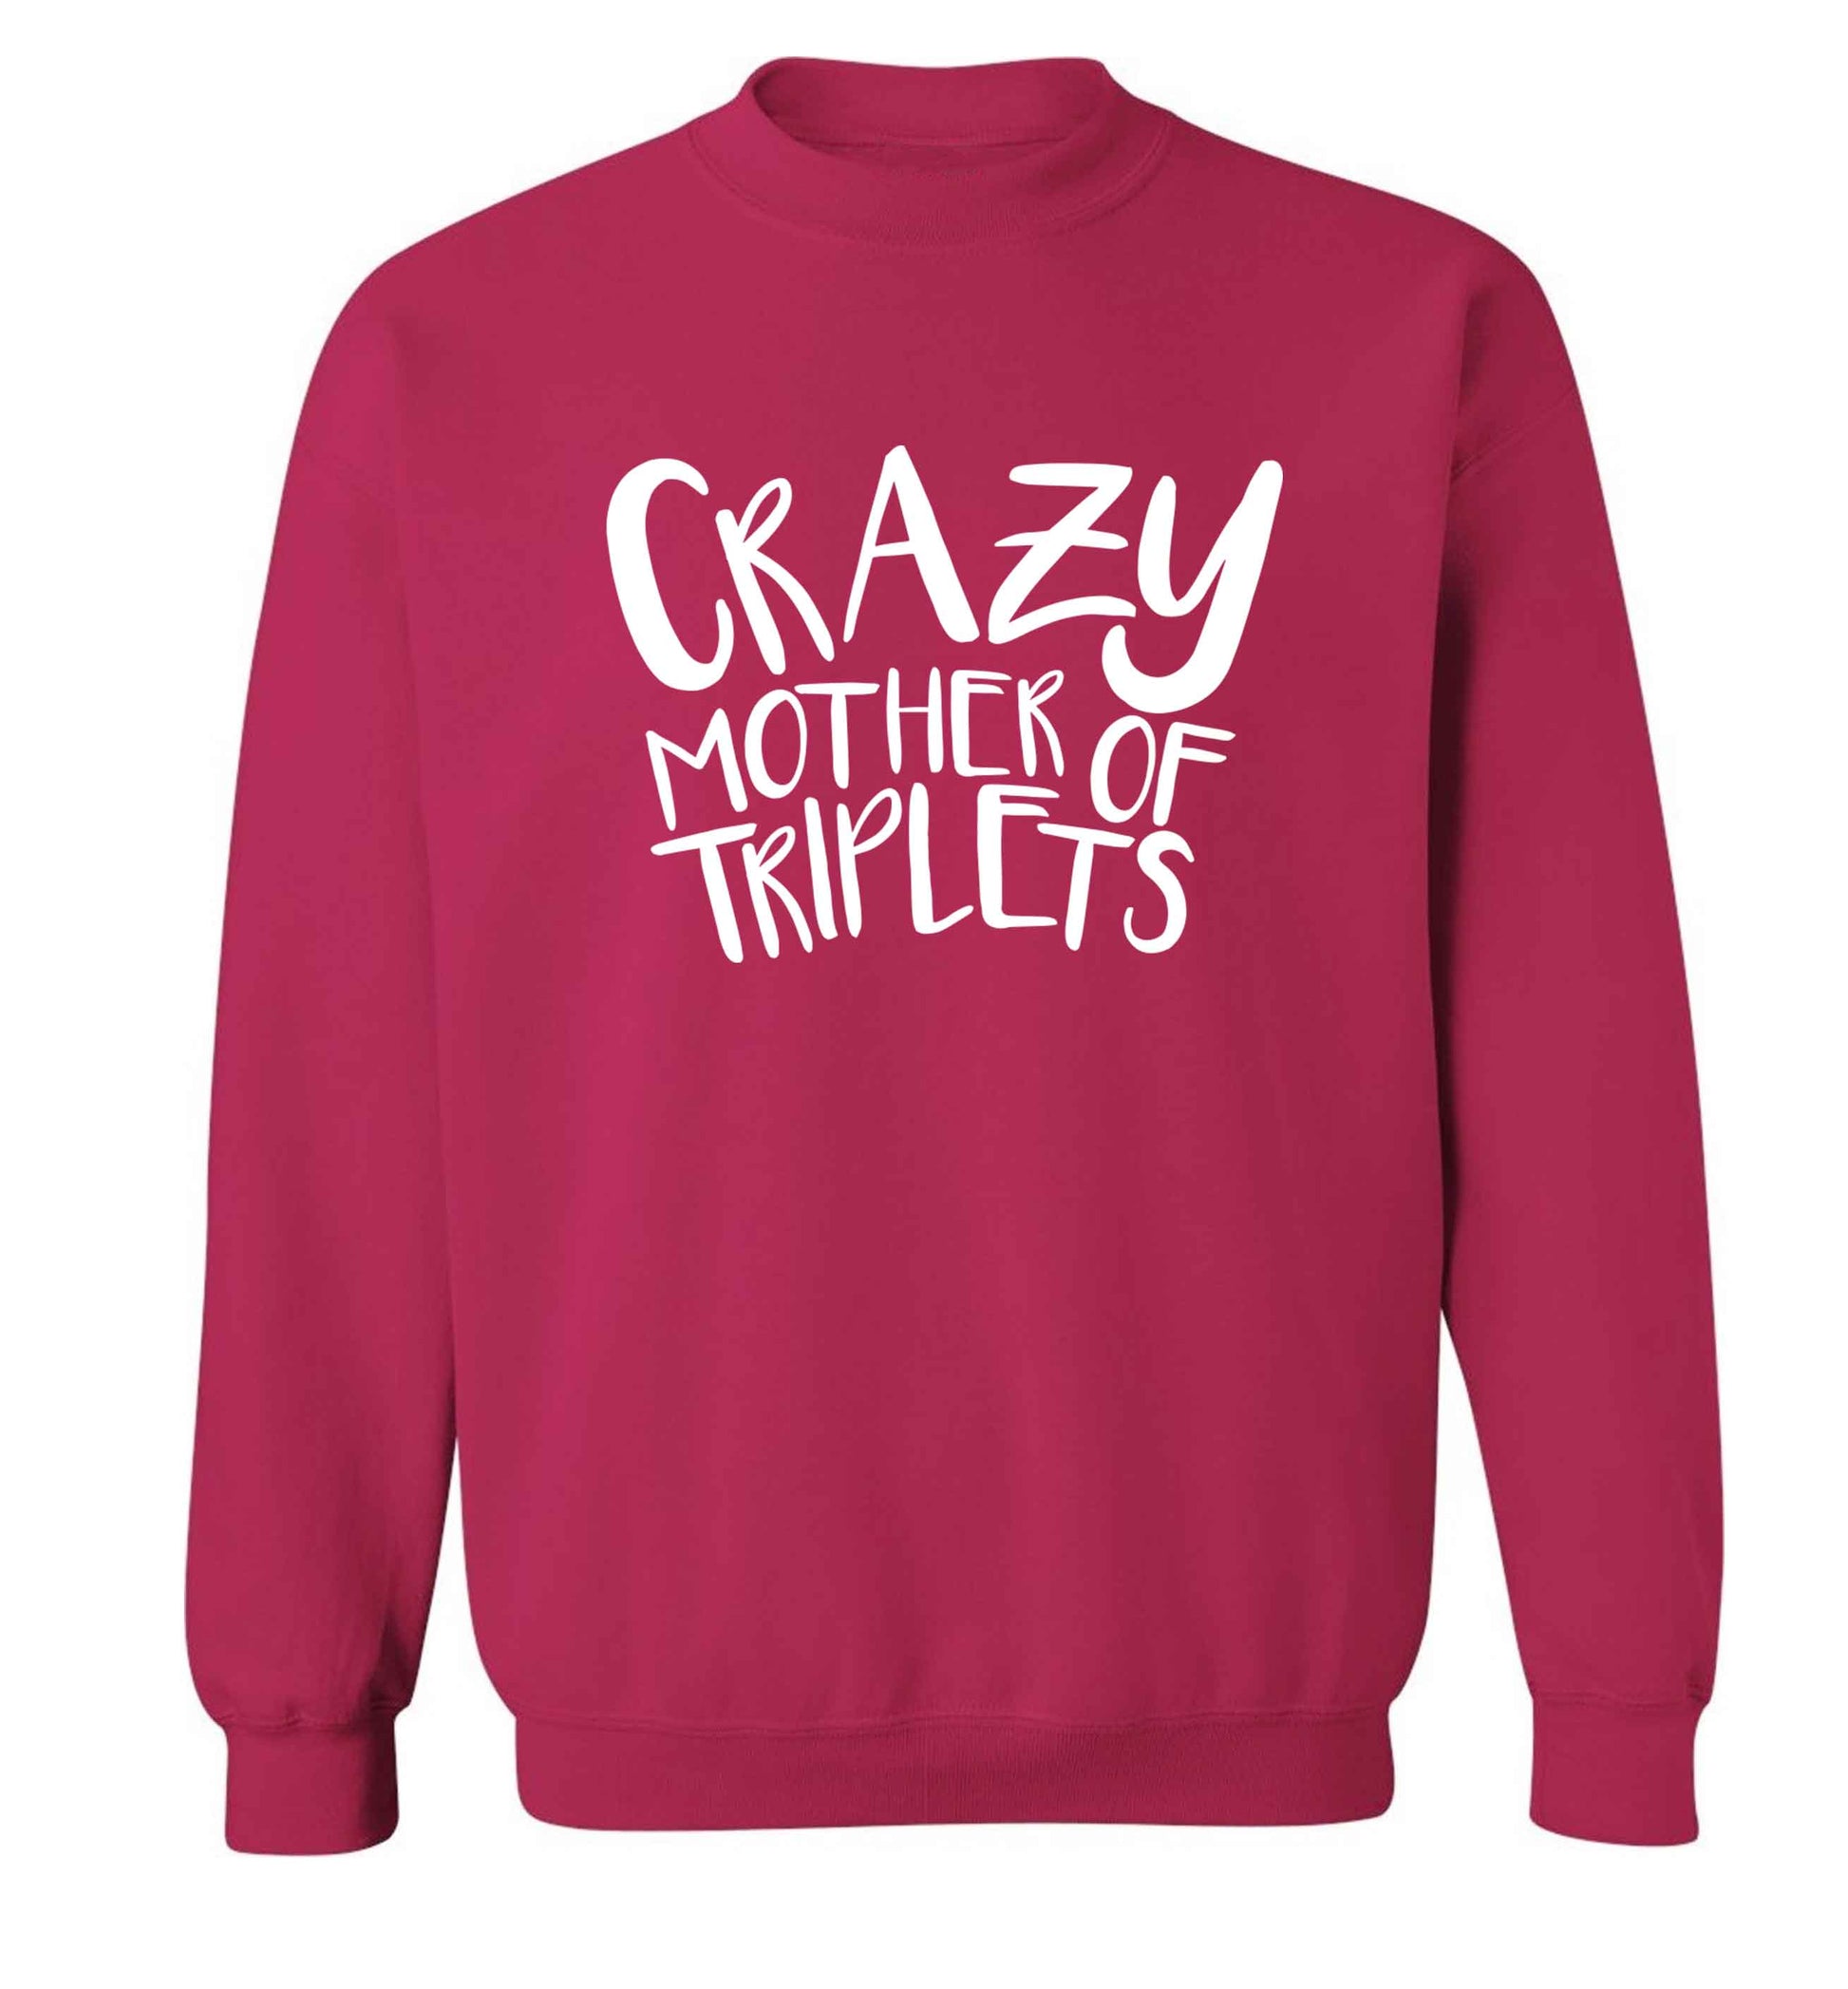 Crazy mother of triplets adult's unisex pink sweater 2XL